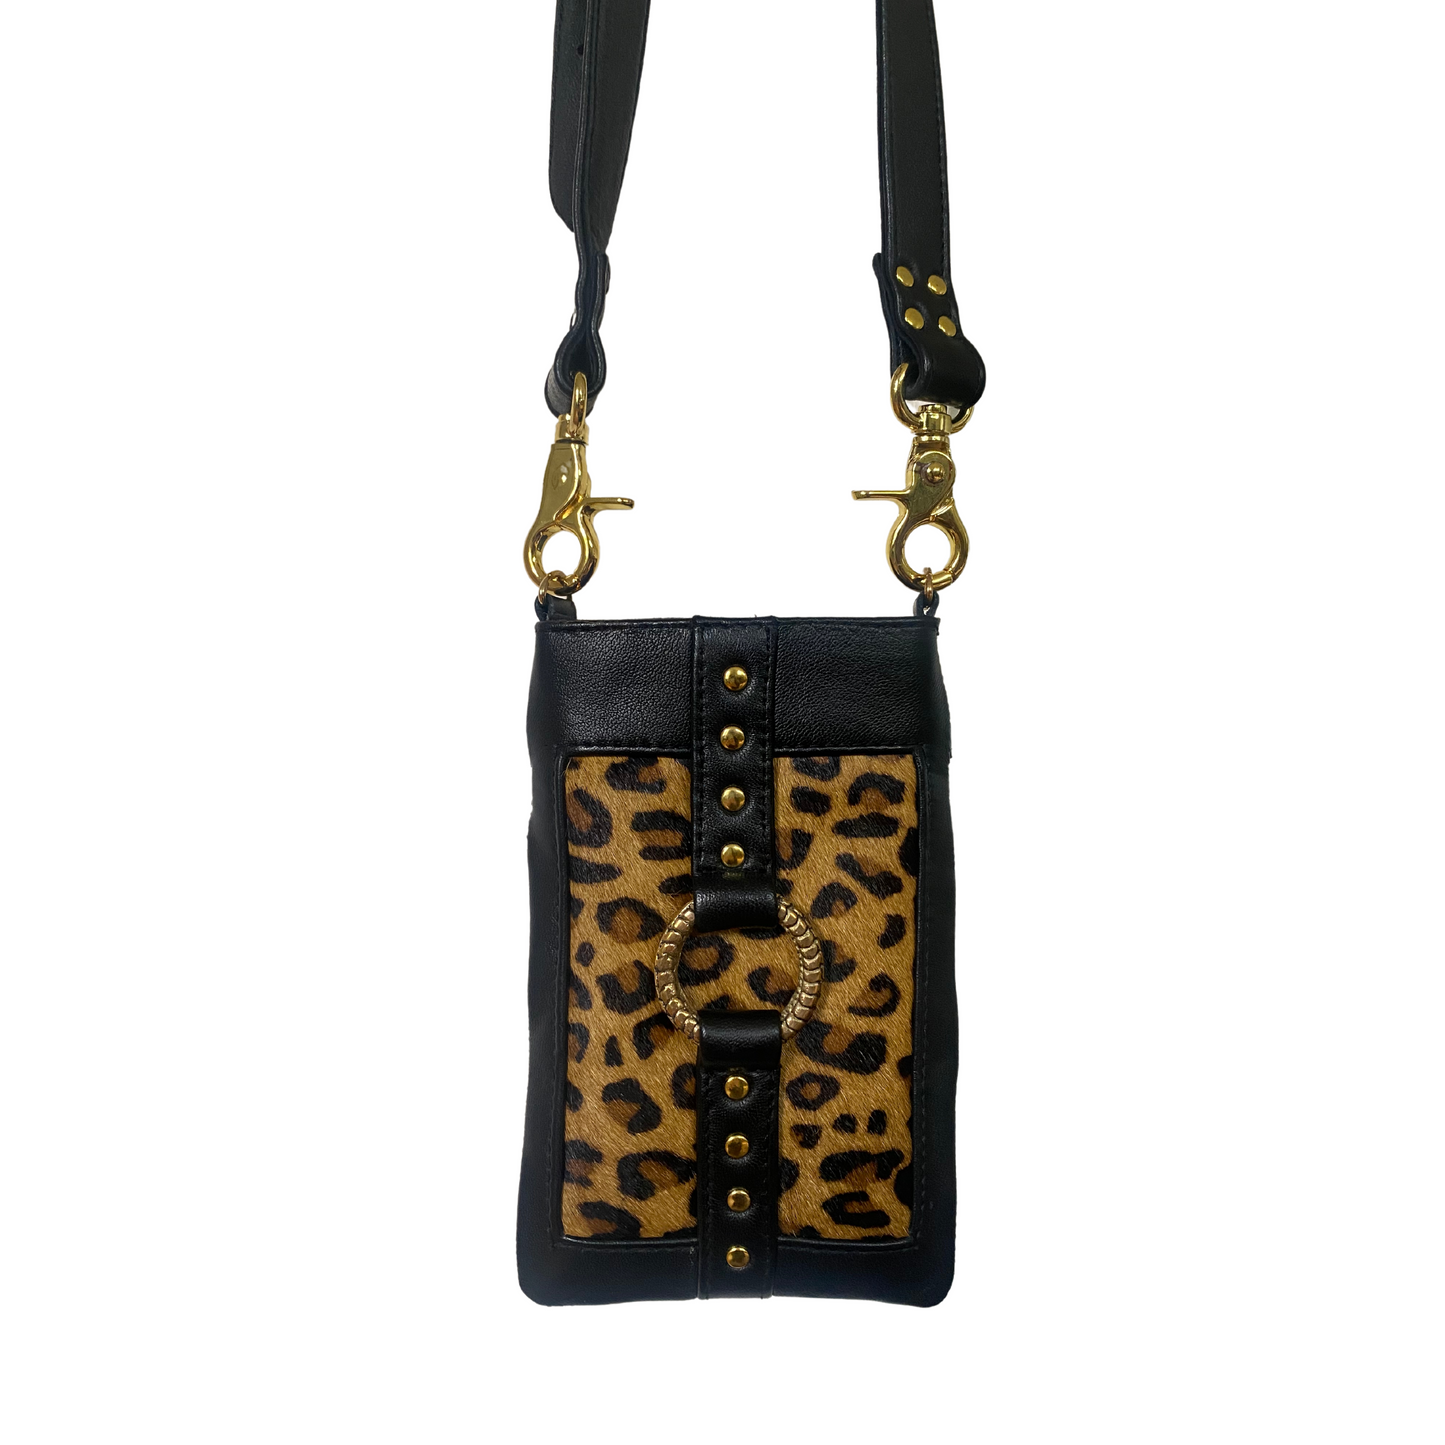 black leather phone holder bag with leopard print cow hide on the front and gold hardware, perfect for iPhone, Australia designer crossbody phone bag. 